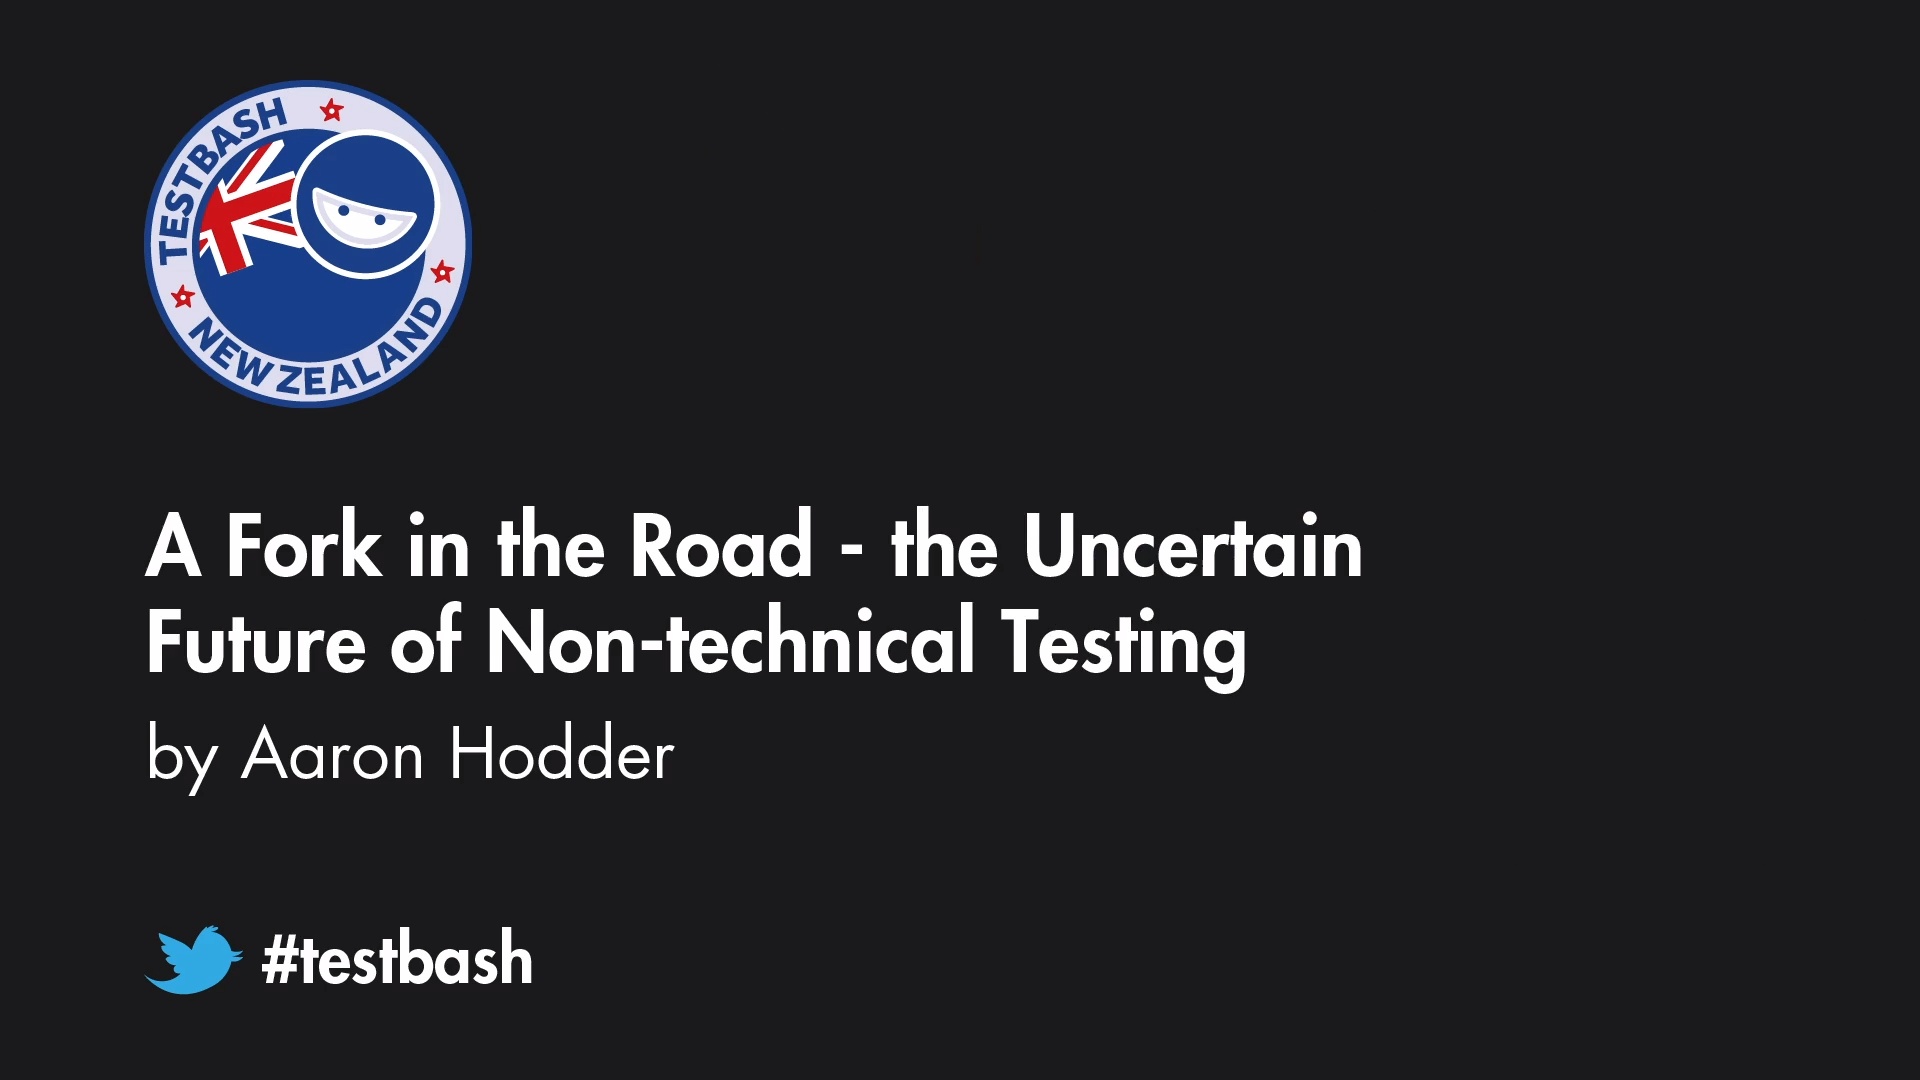 A Fork in the Road: the Uncertain Future of Non-technical Testing - Aaron Hodder